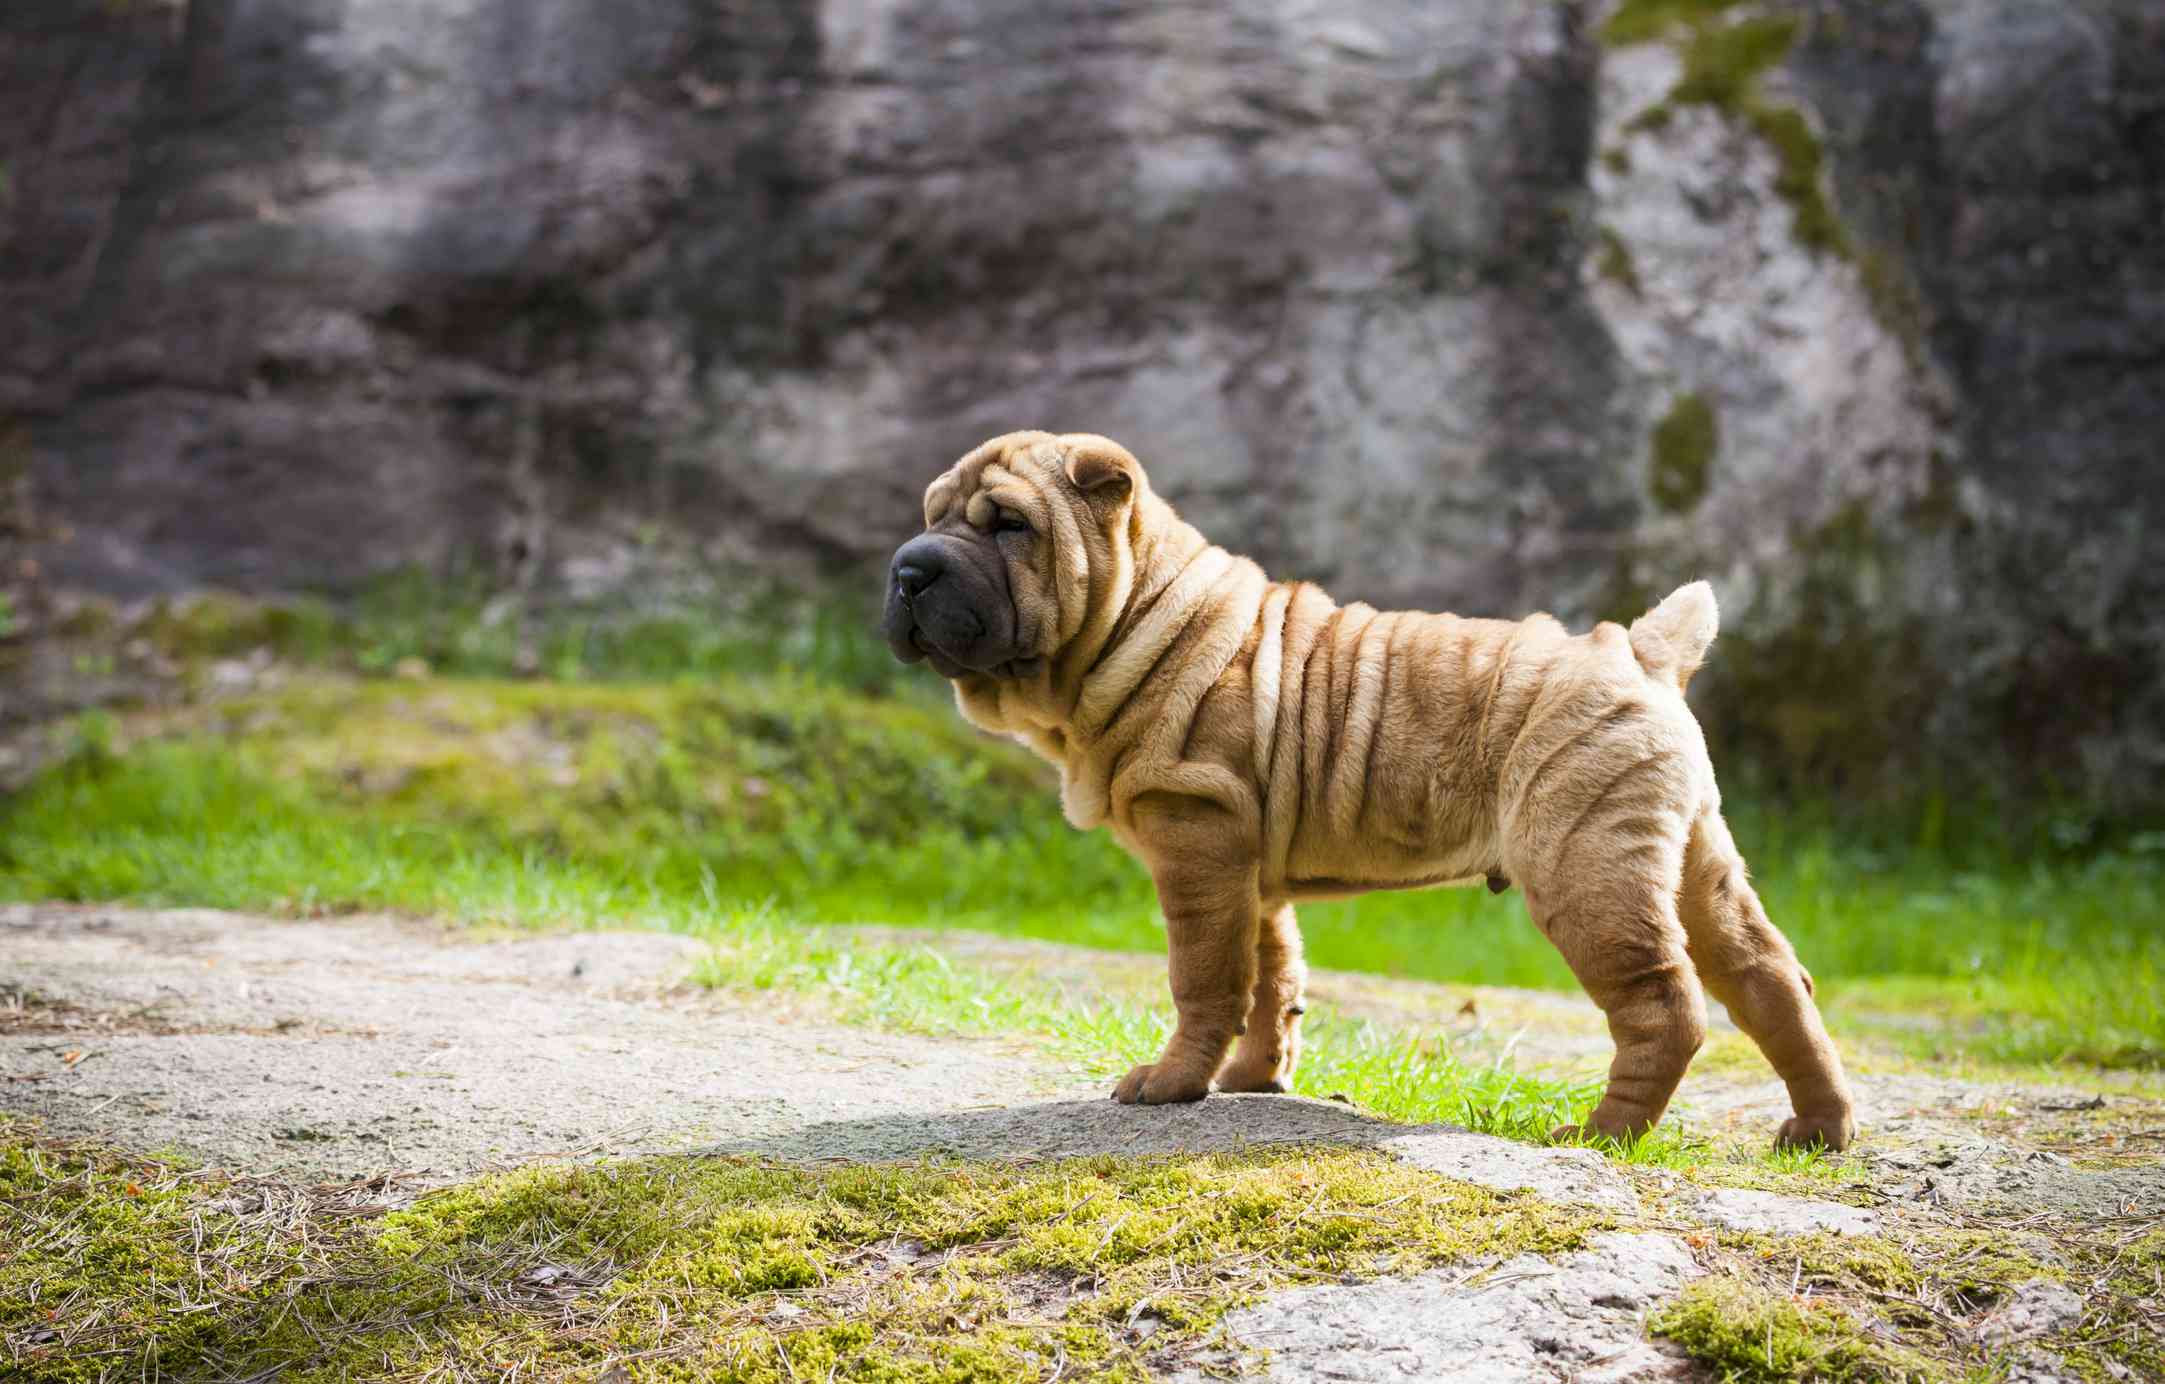 A very wrinkly Shar-Pei puppy with a tan coat and a black nose walking in the forest.